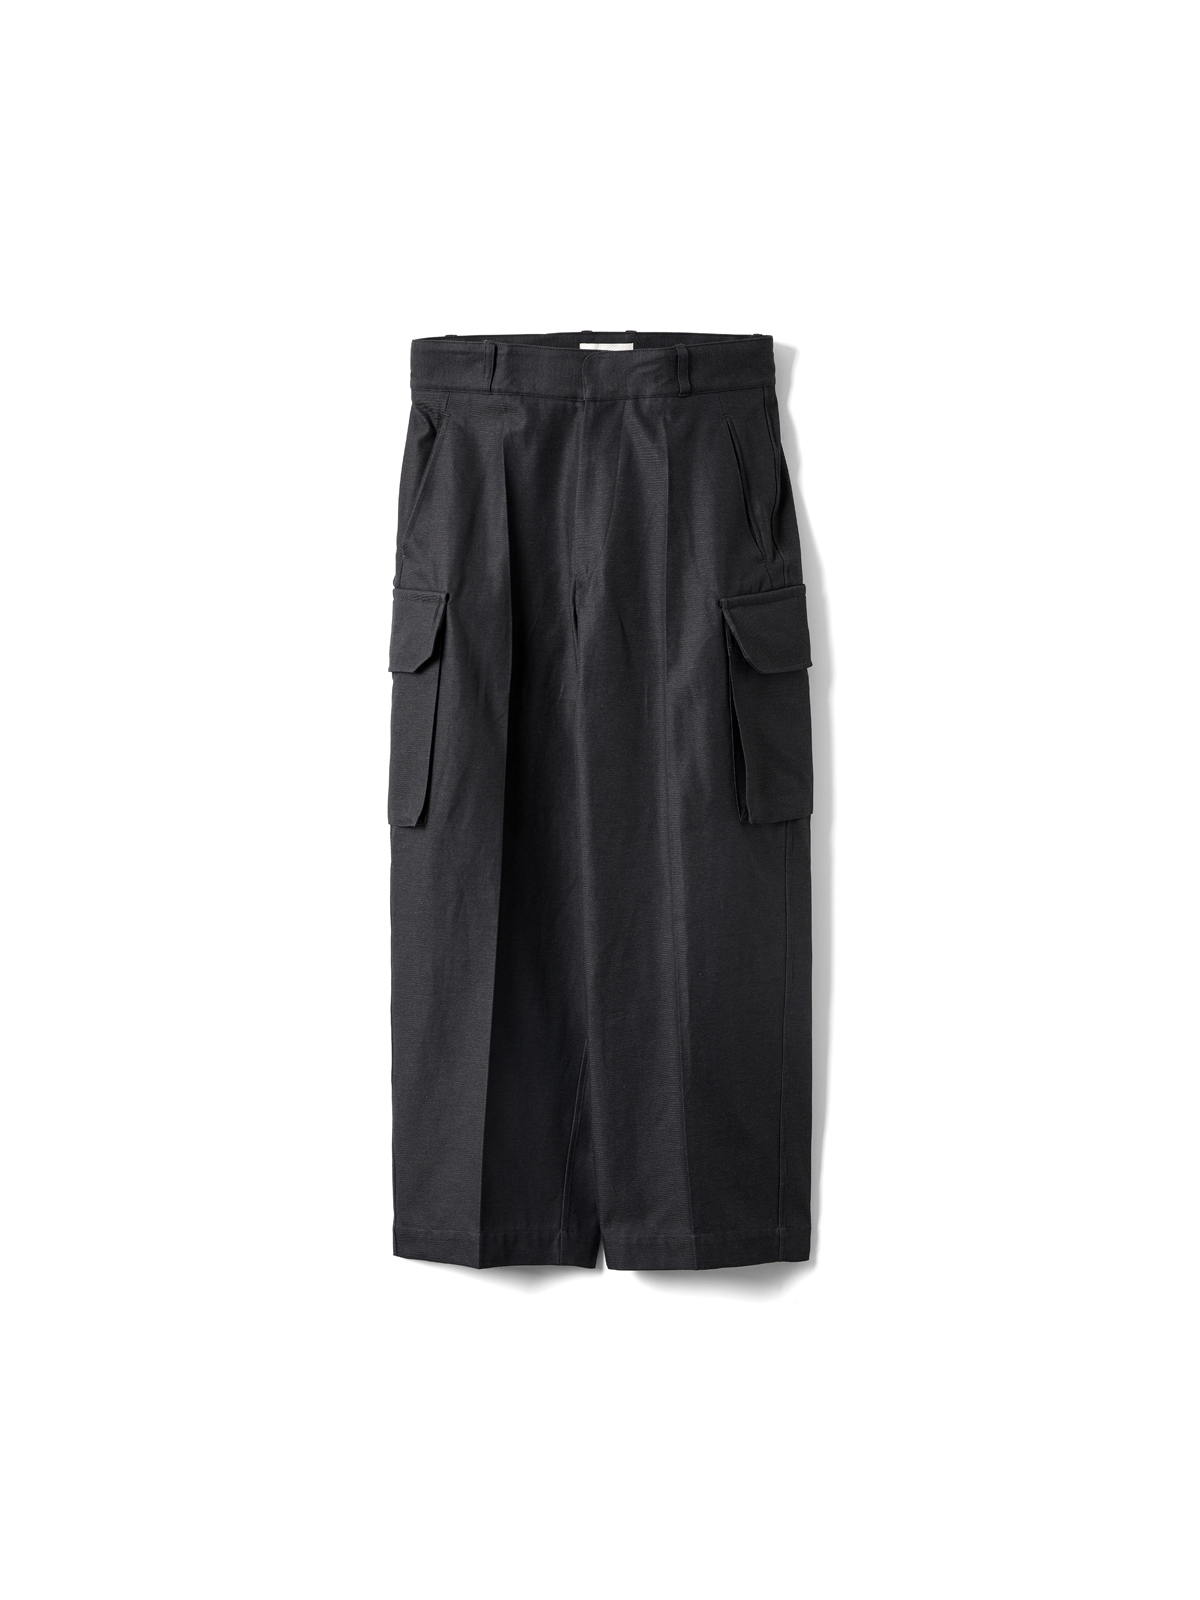 DRILL CHAMBRAY FRENCH COMBAT TROUSERS (HEATHERCHARCOAL)